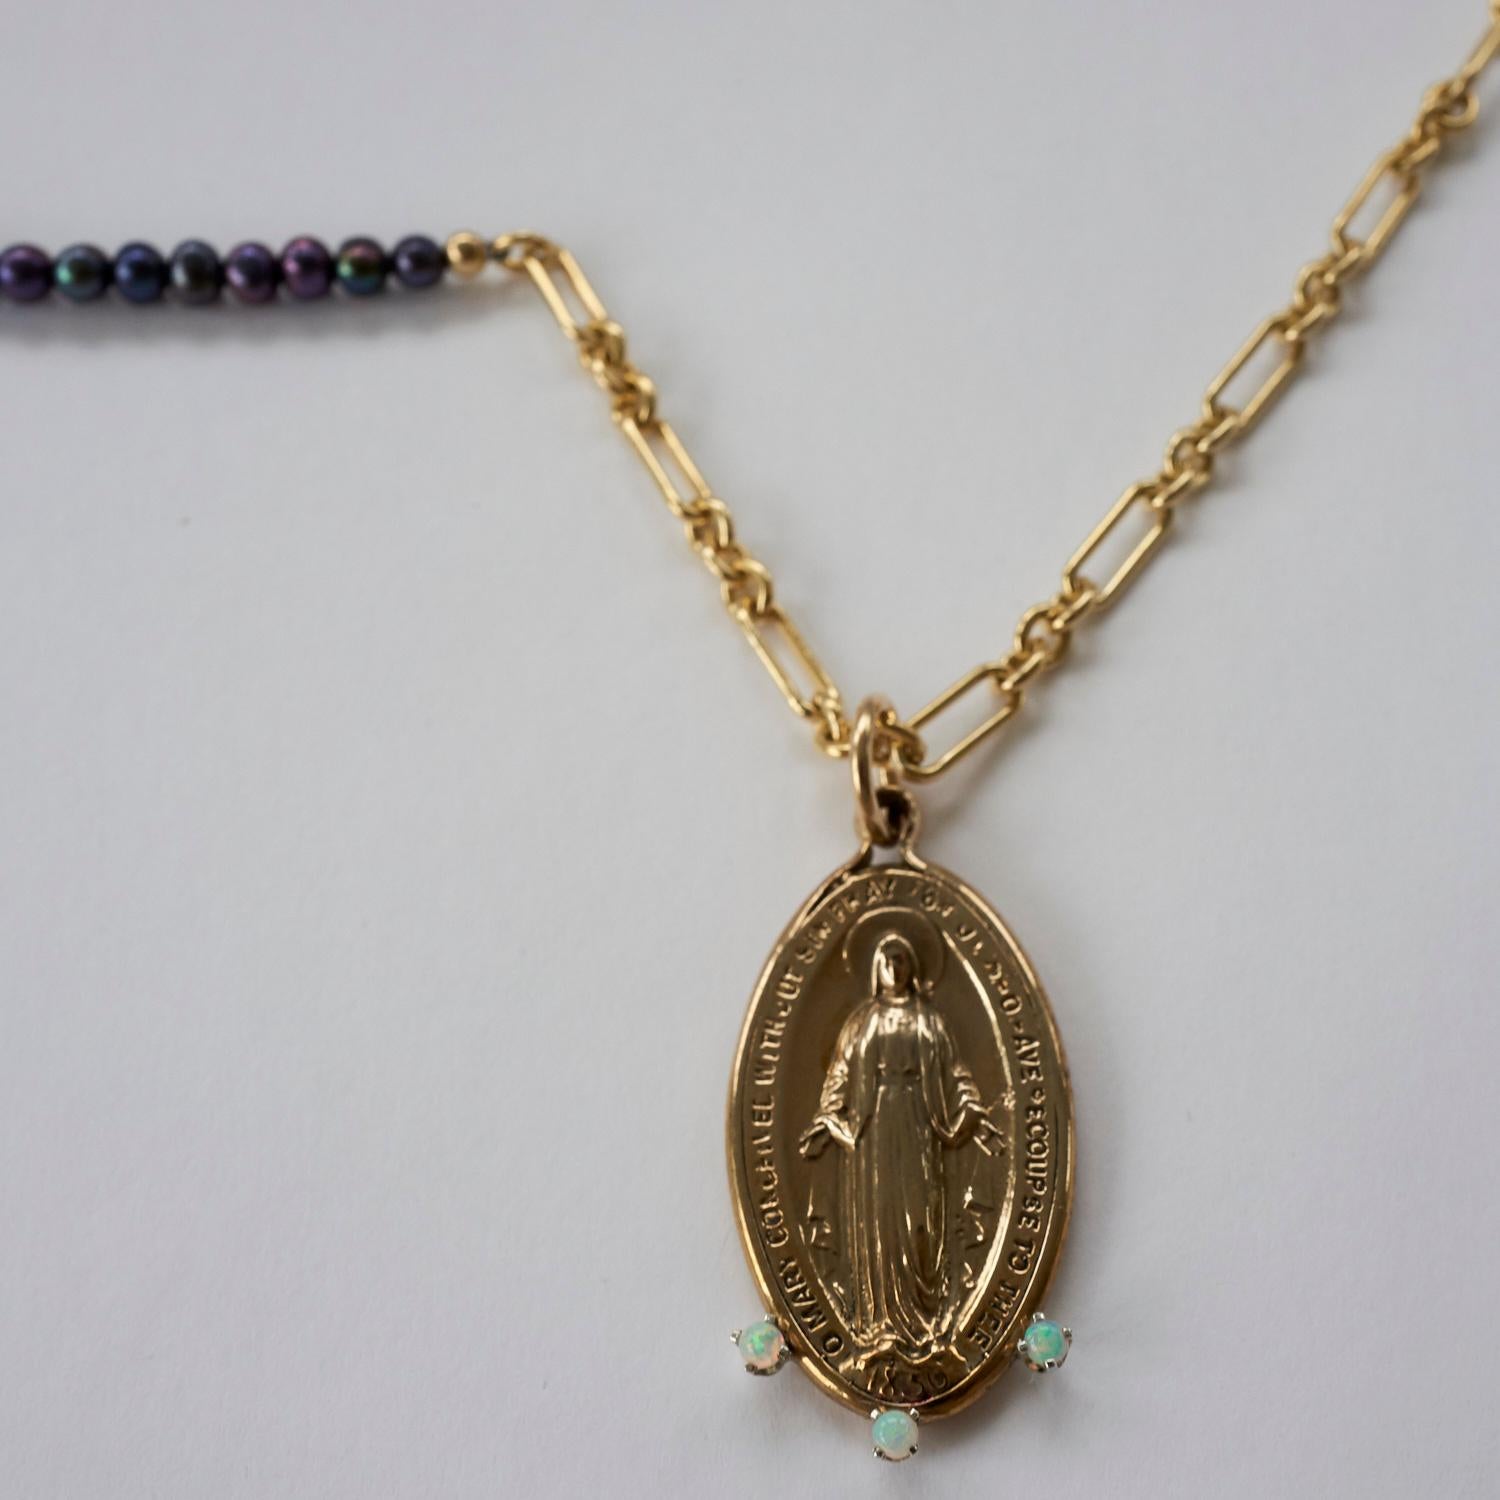 Virgin Mary Medal Coin Opal Black Pearl Statement Chain Necklace J Dauphin In New Condition For Sale In Los Angeles, CA